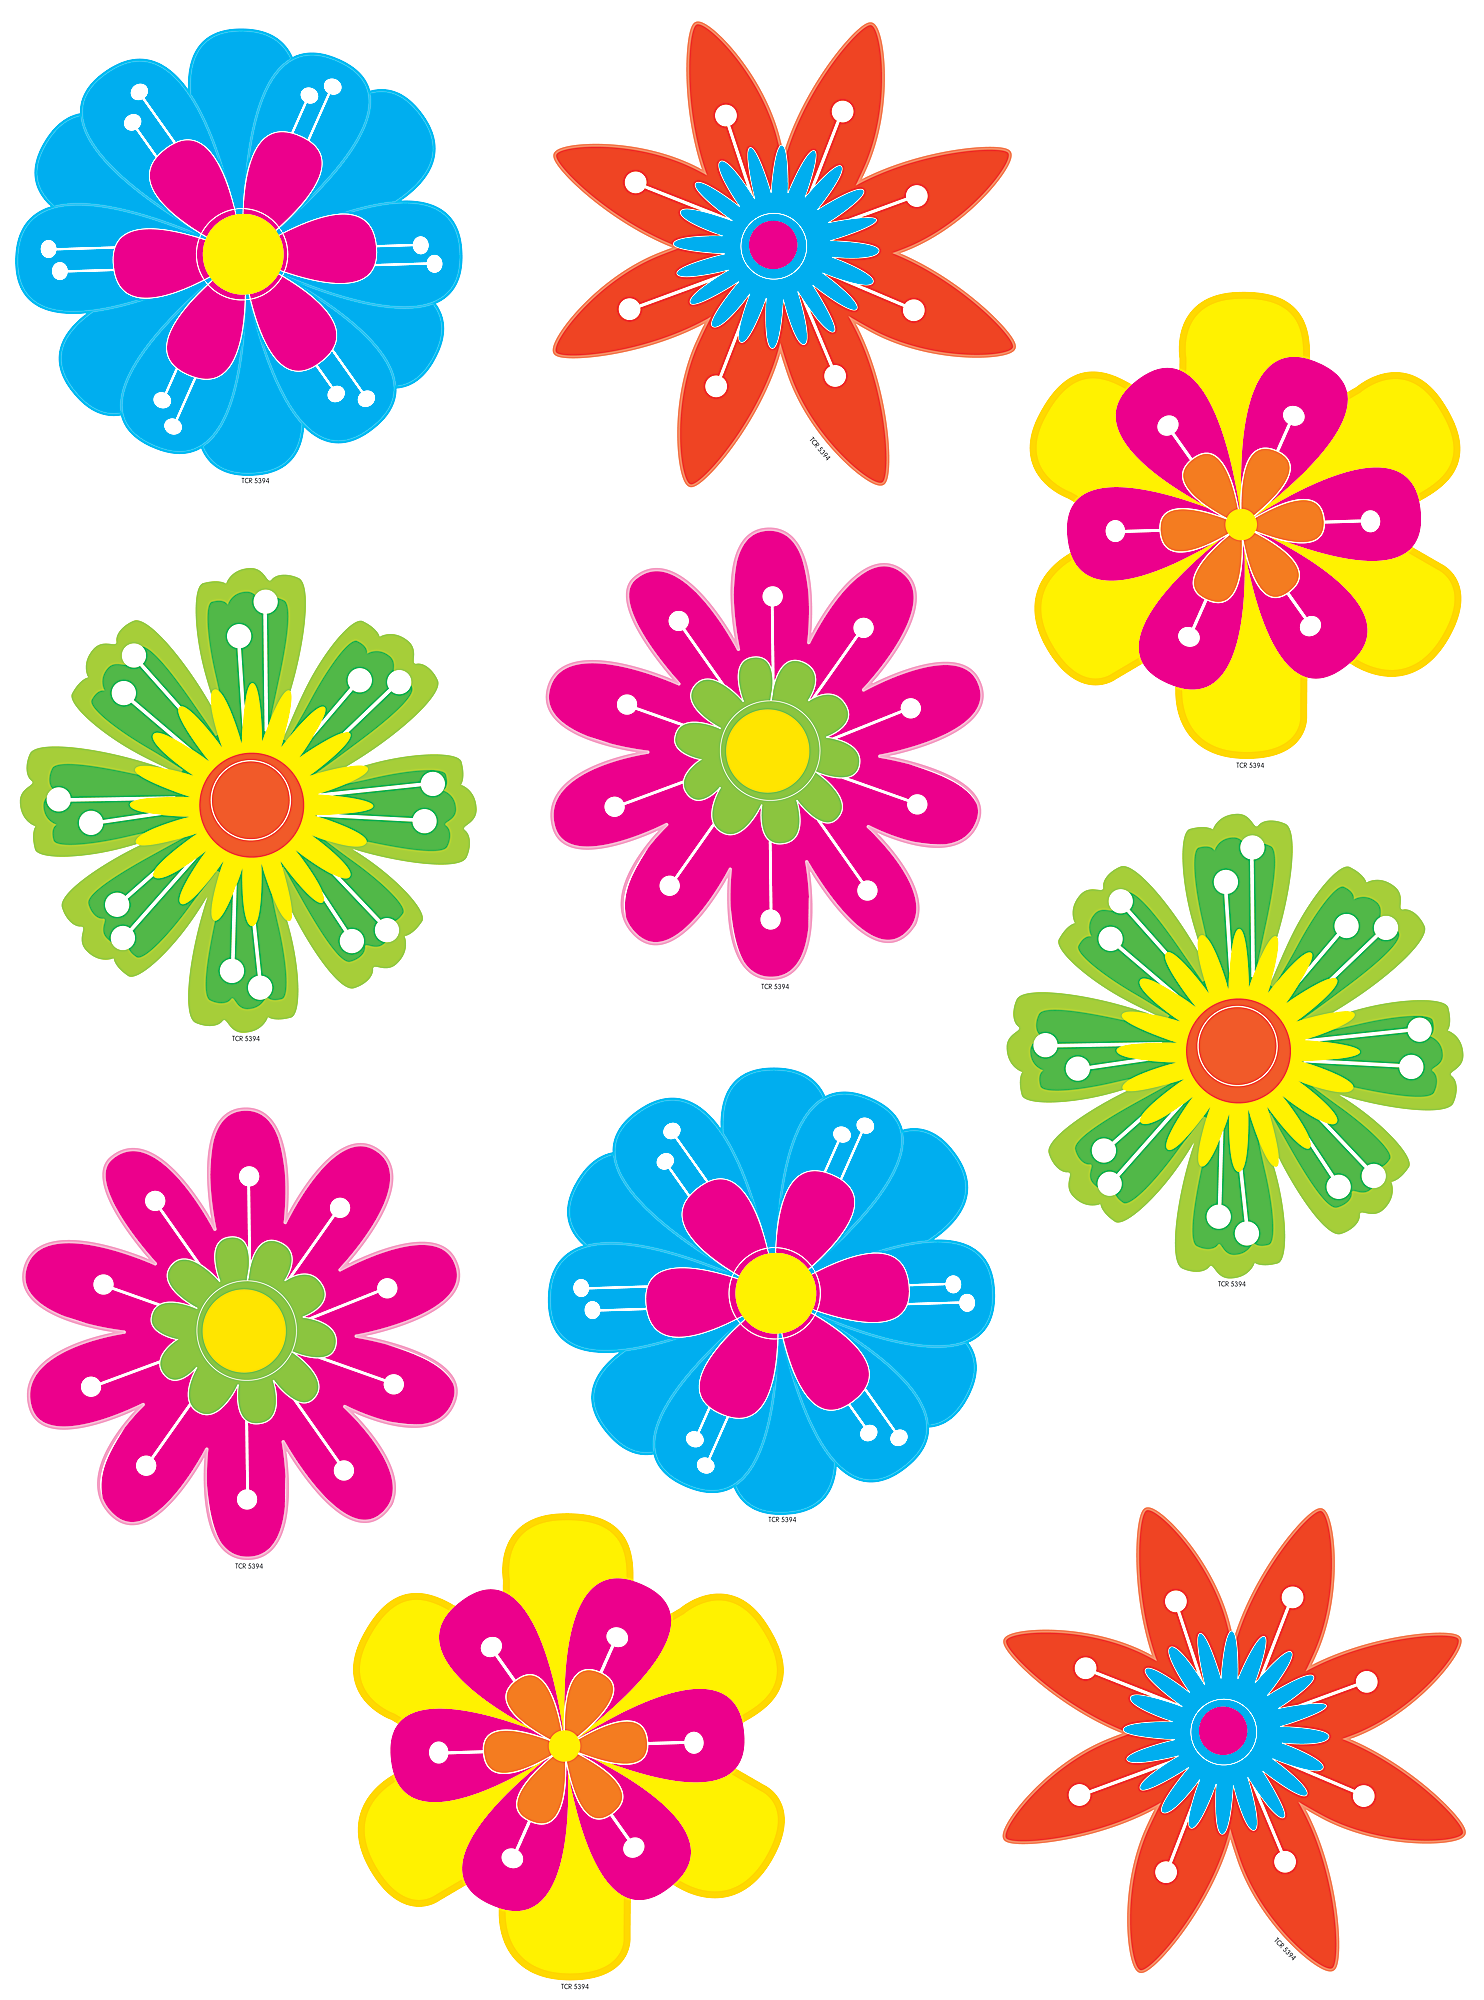 Fun Flowers Accents (1484x2000)